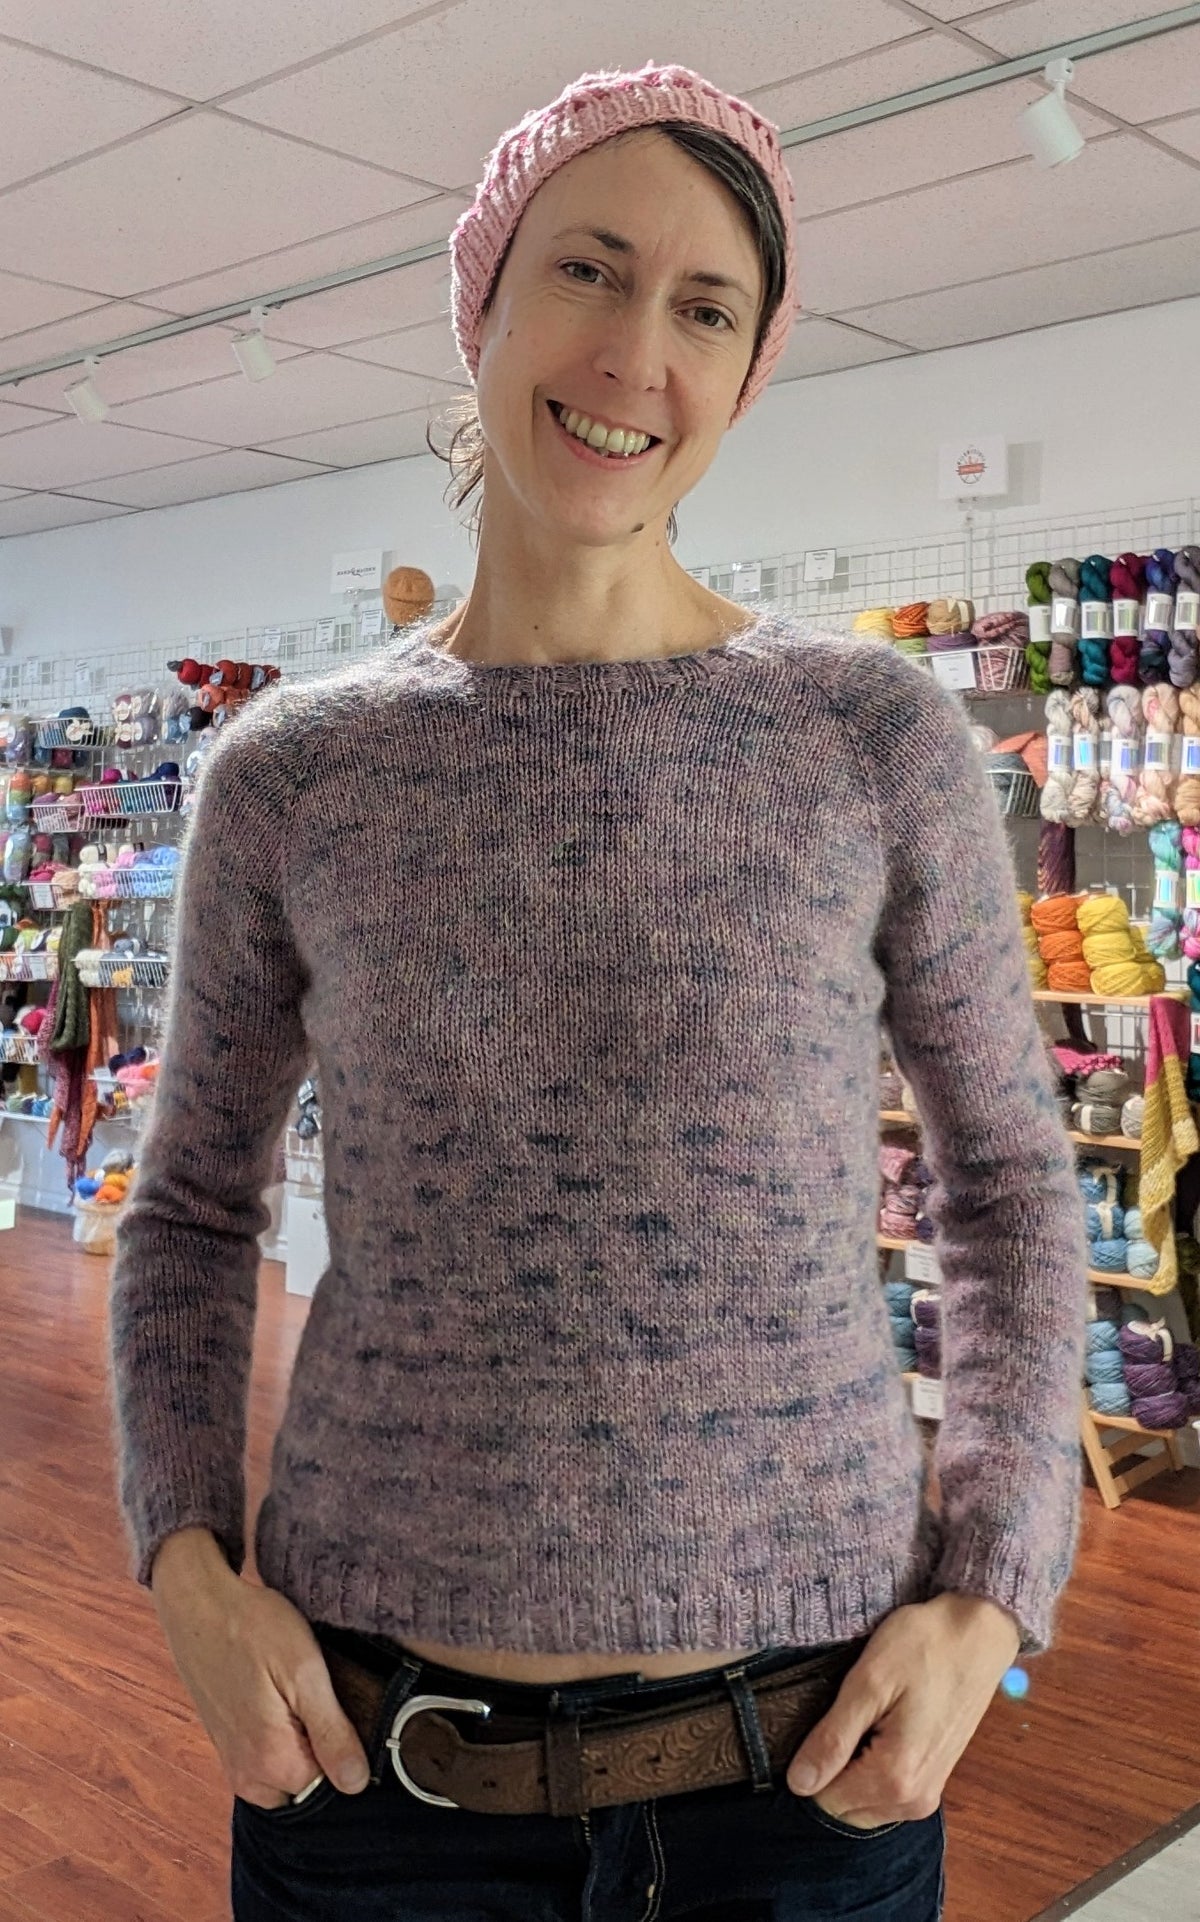 Sweater Knitting Class | That fits you